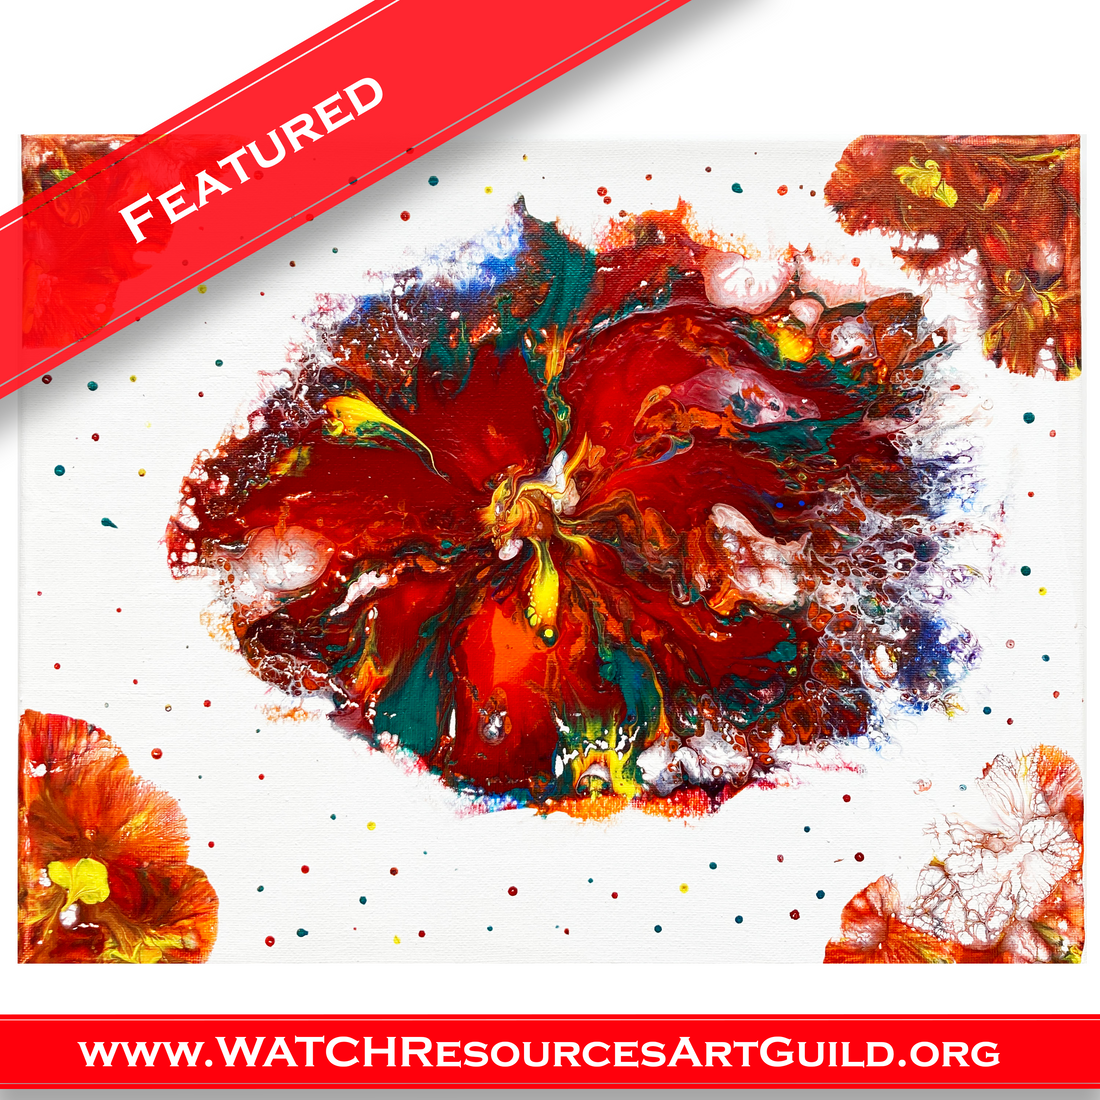 WATCH Resources Art Guild - August 2021 New and Featured